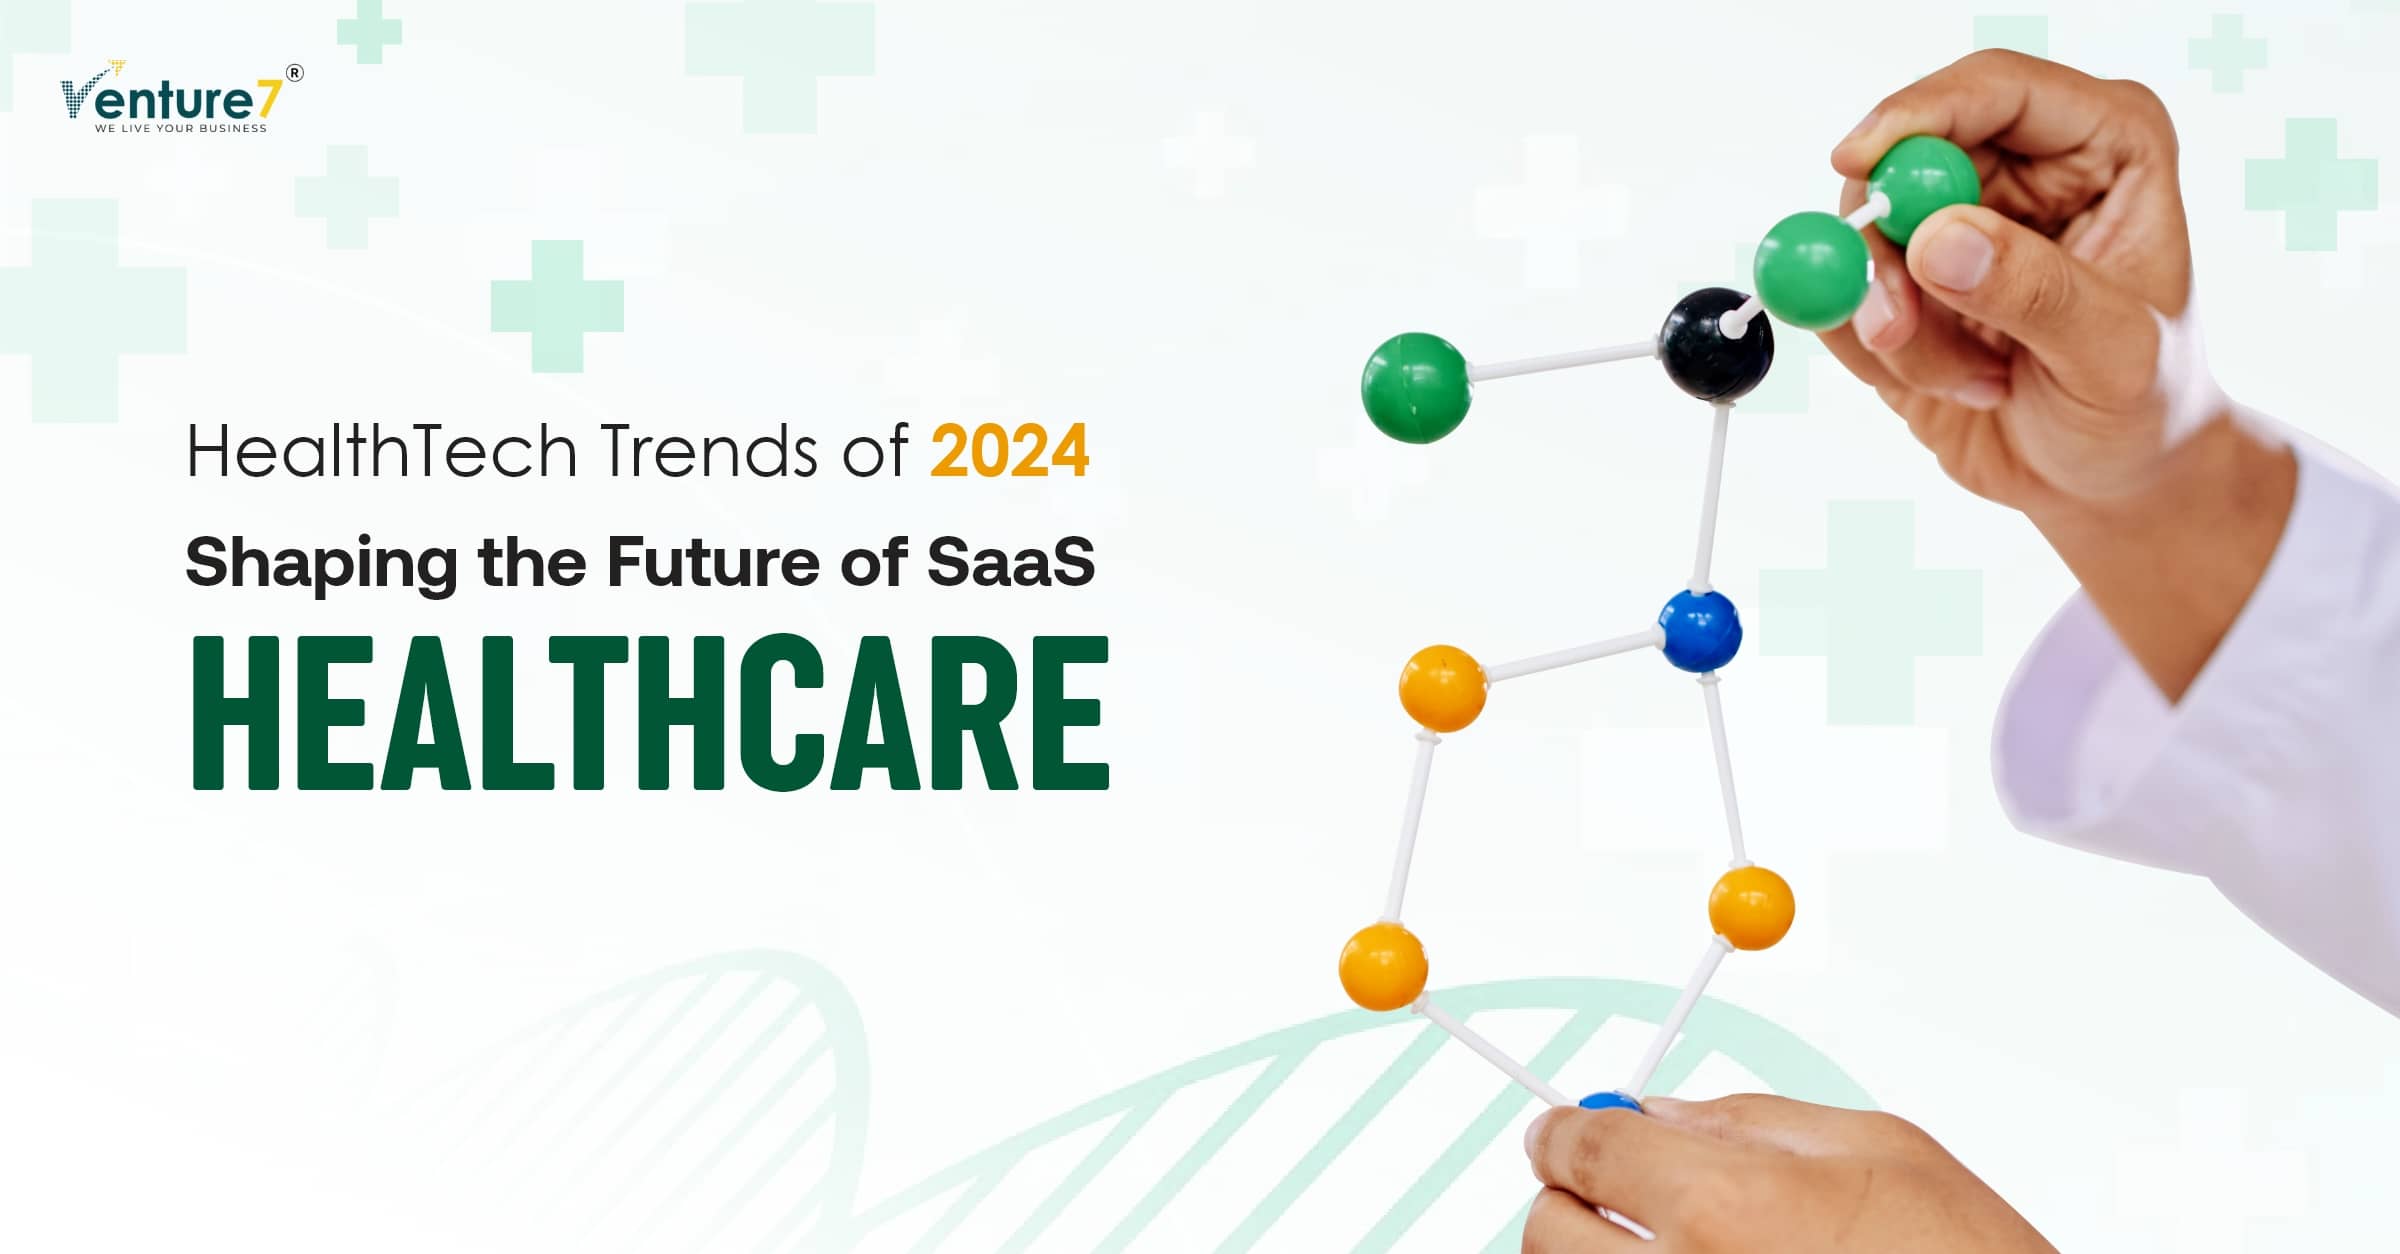  Shaping the Future of SaaS Healthcare